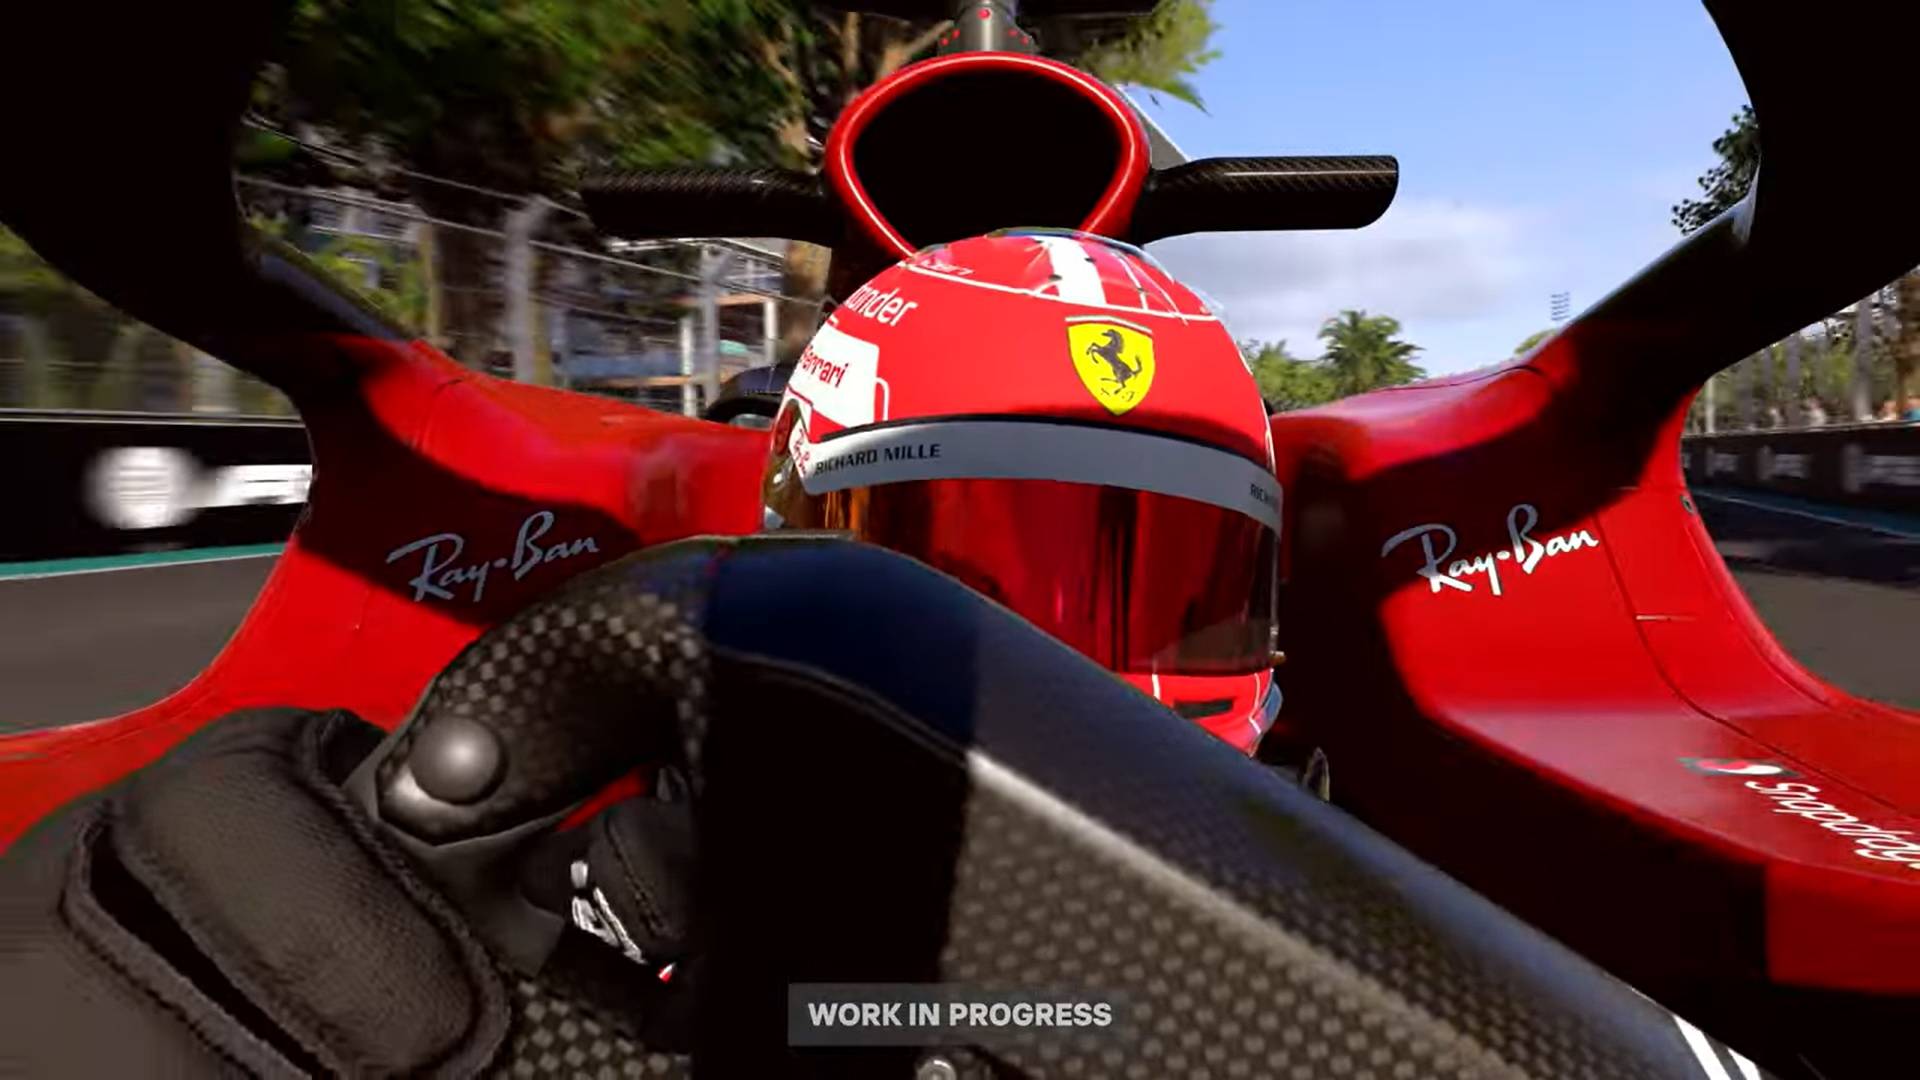 F1 2022 is scheduled for release on 1st July 2022.